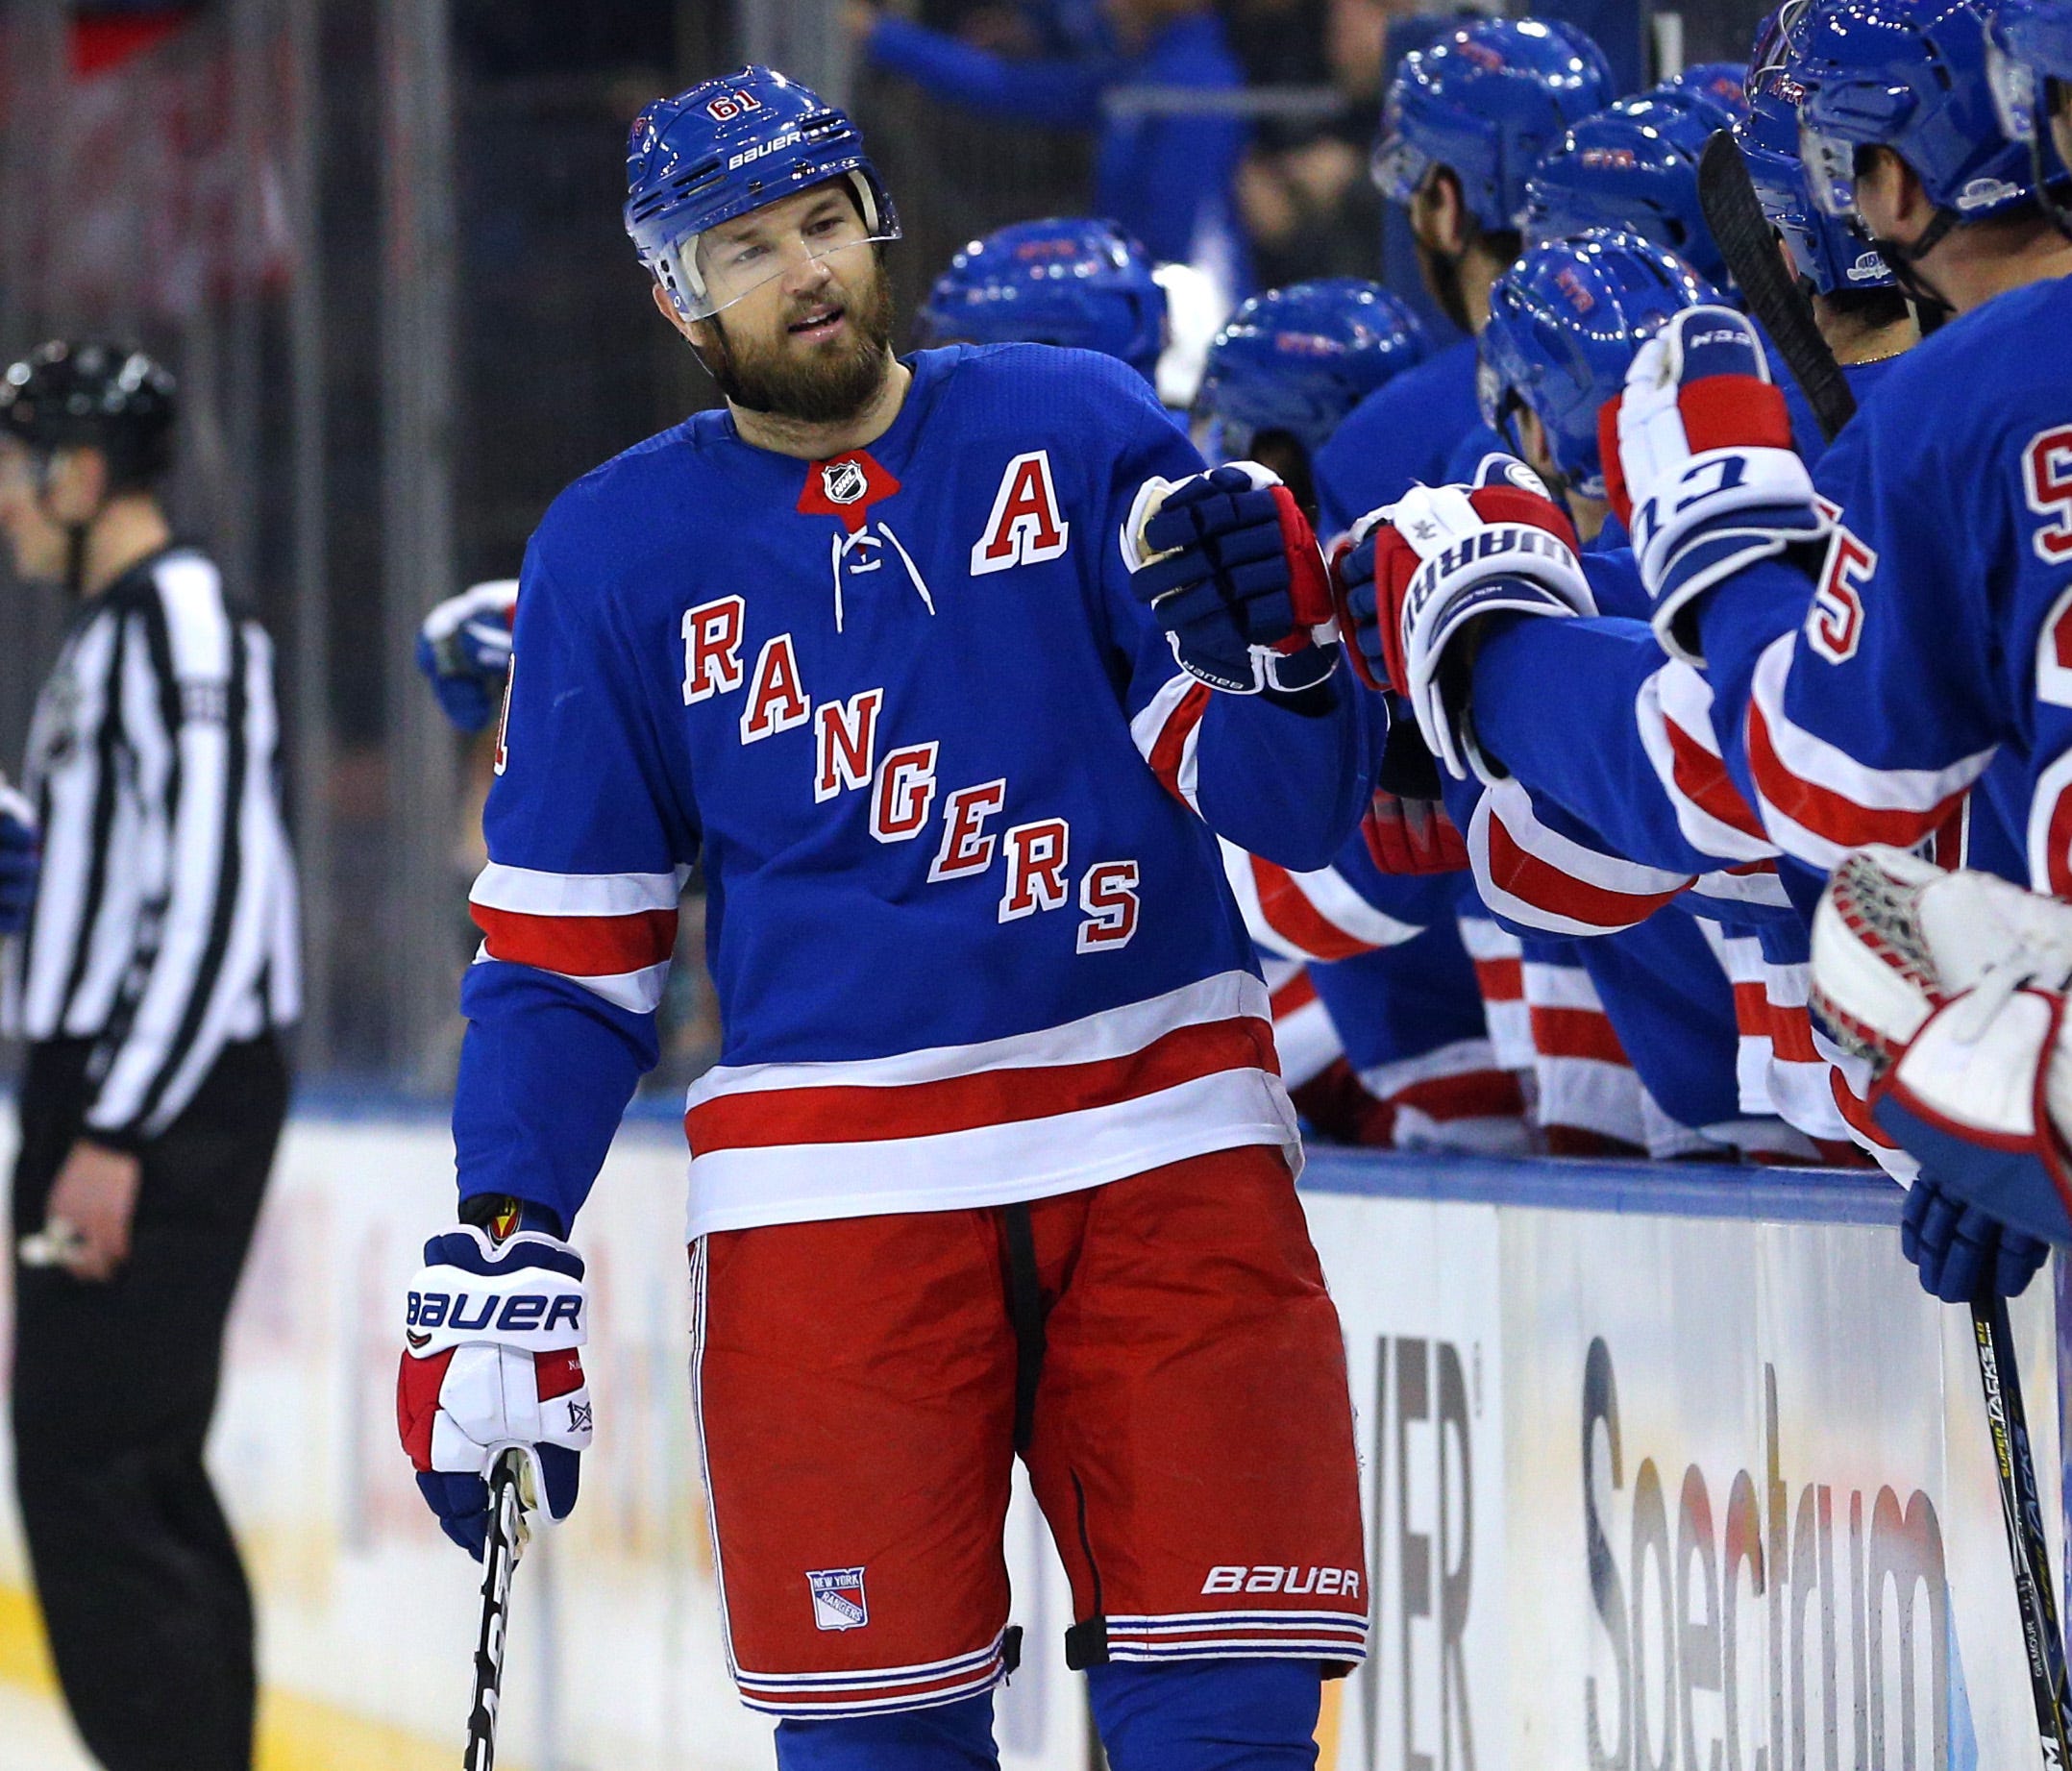 Rangers left wing Rick Nash likely has played his last game with the franchise this season.